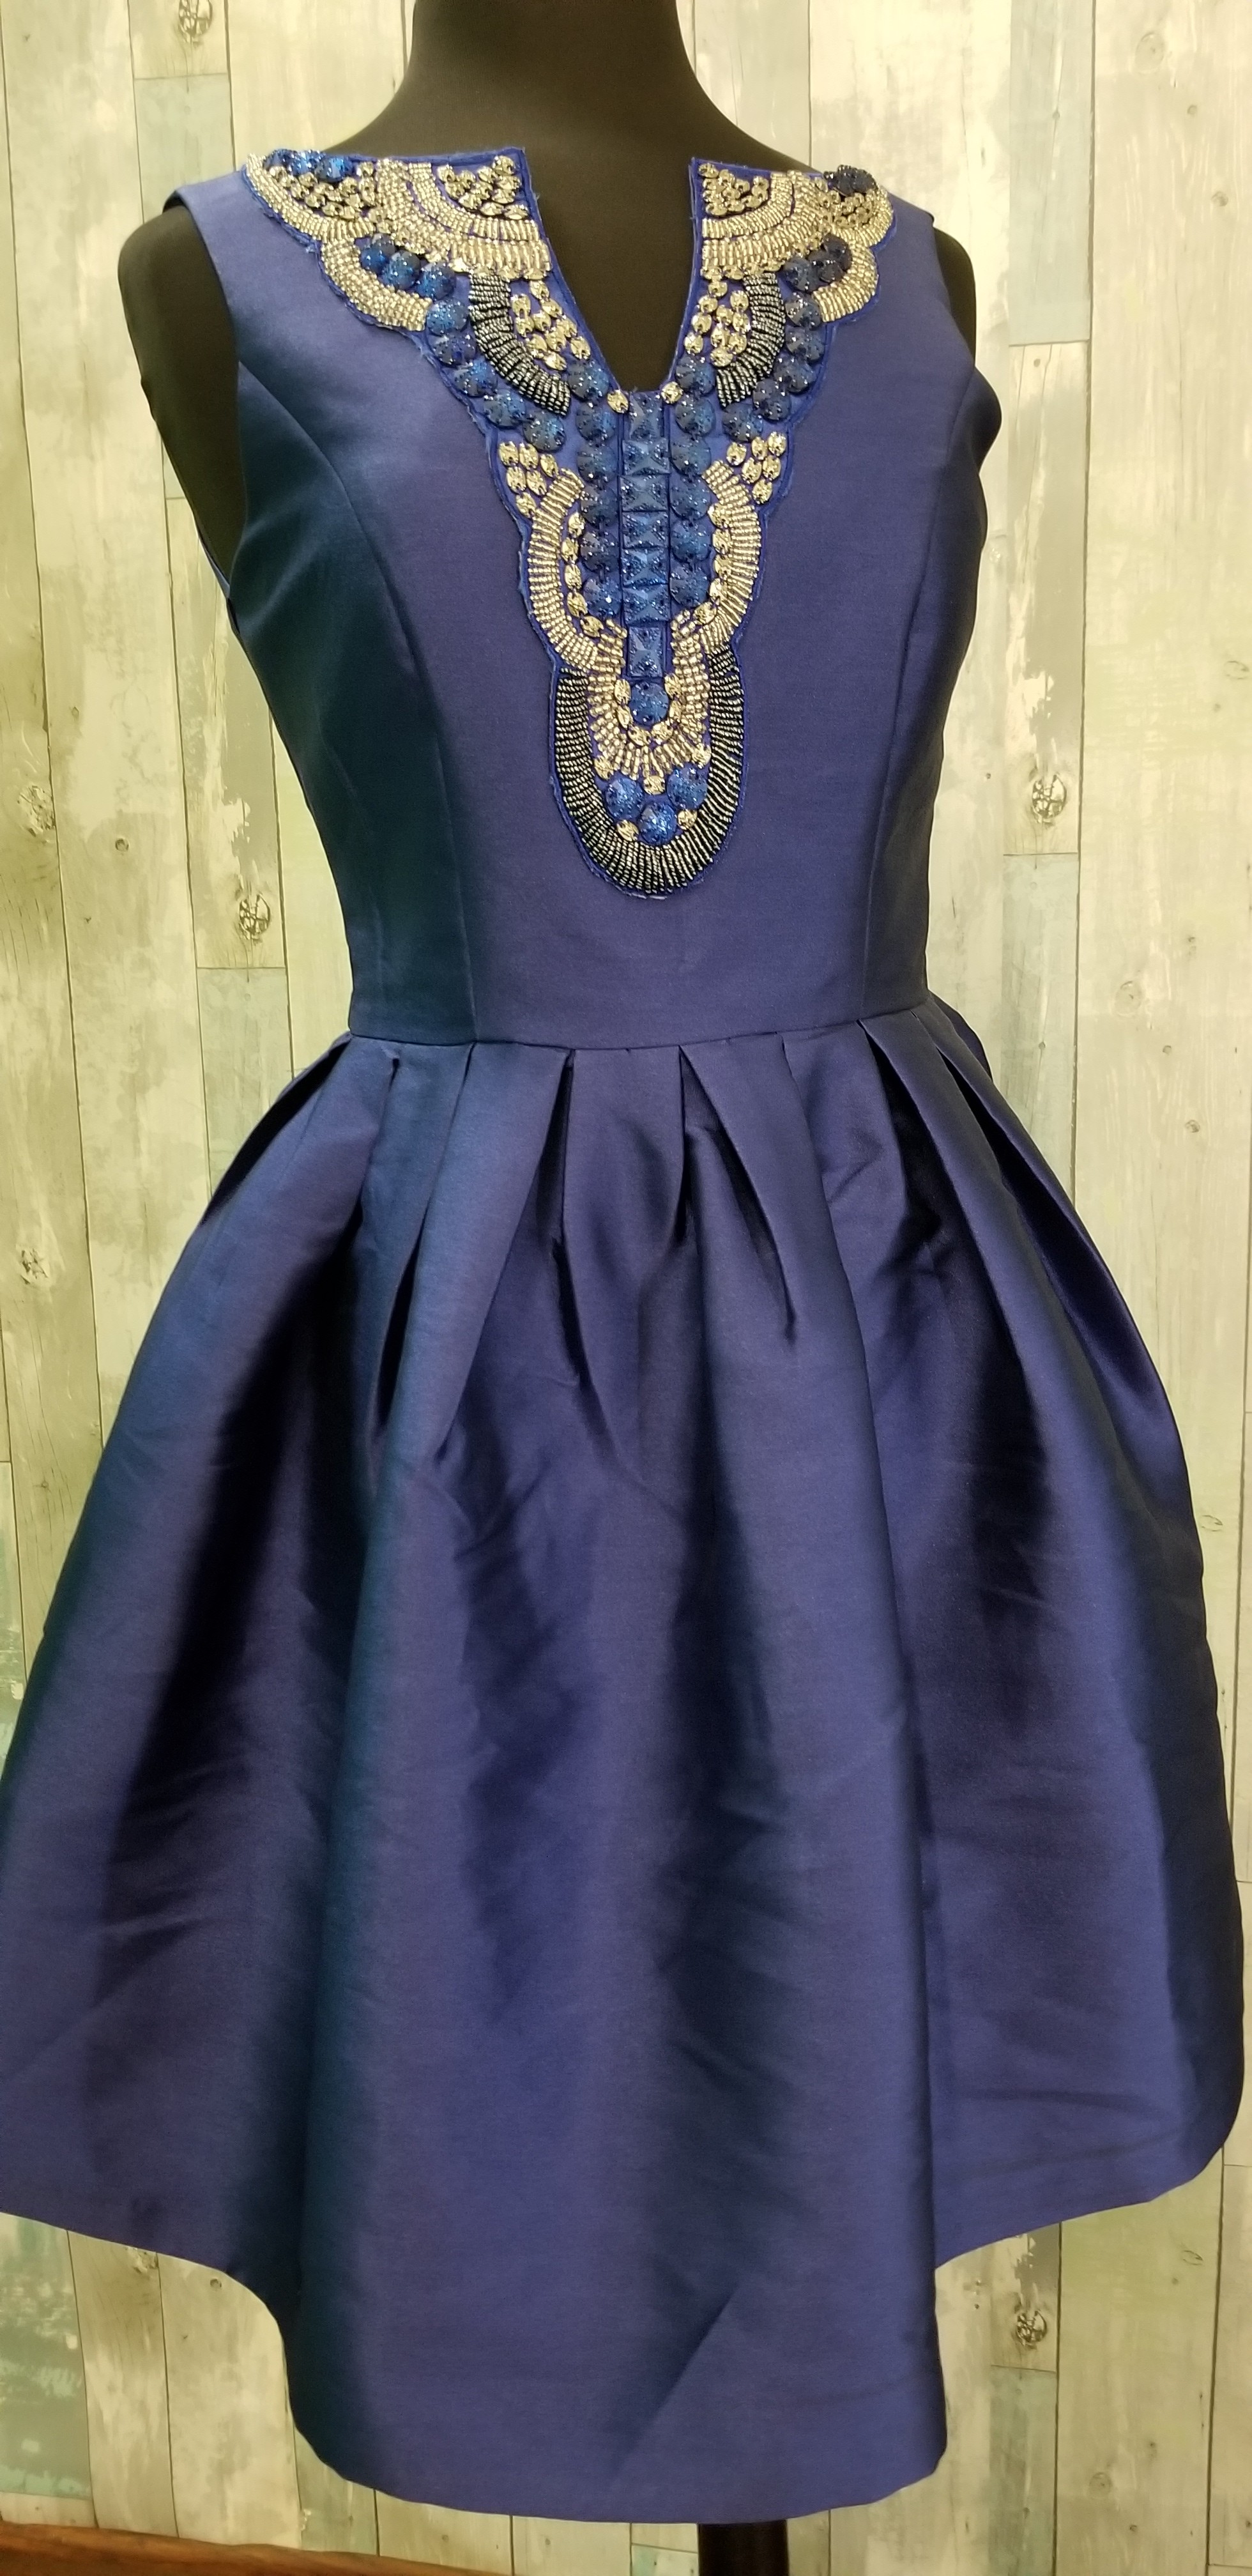 NWT Minuet Beaded Dress
Side pockets and just fun! Fully lined with back zipper.
Purplish-blue color
Size: Medium